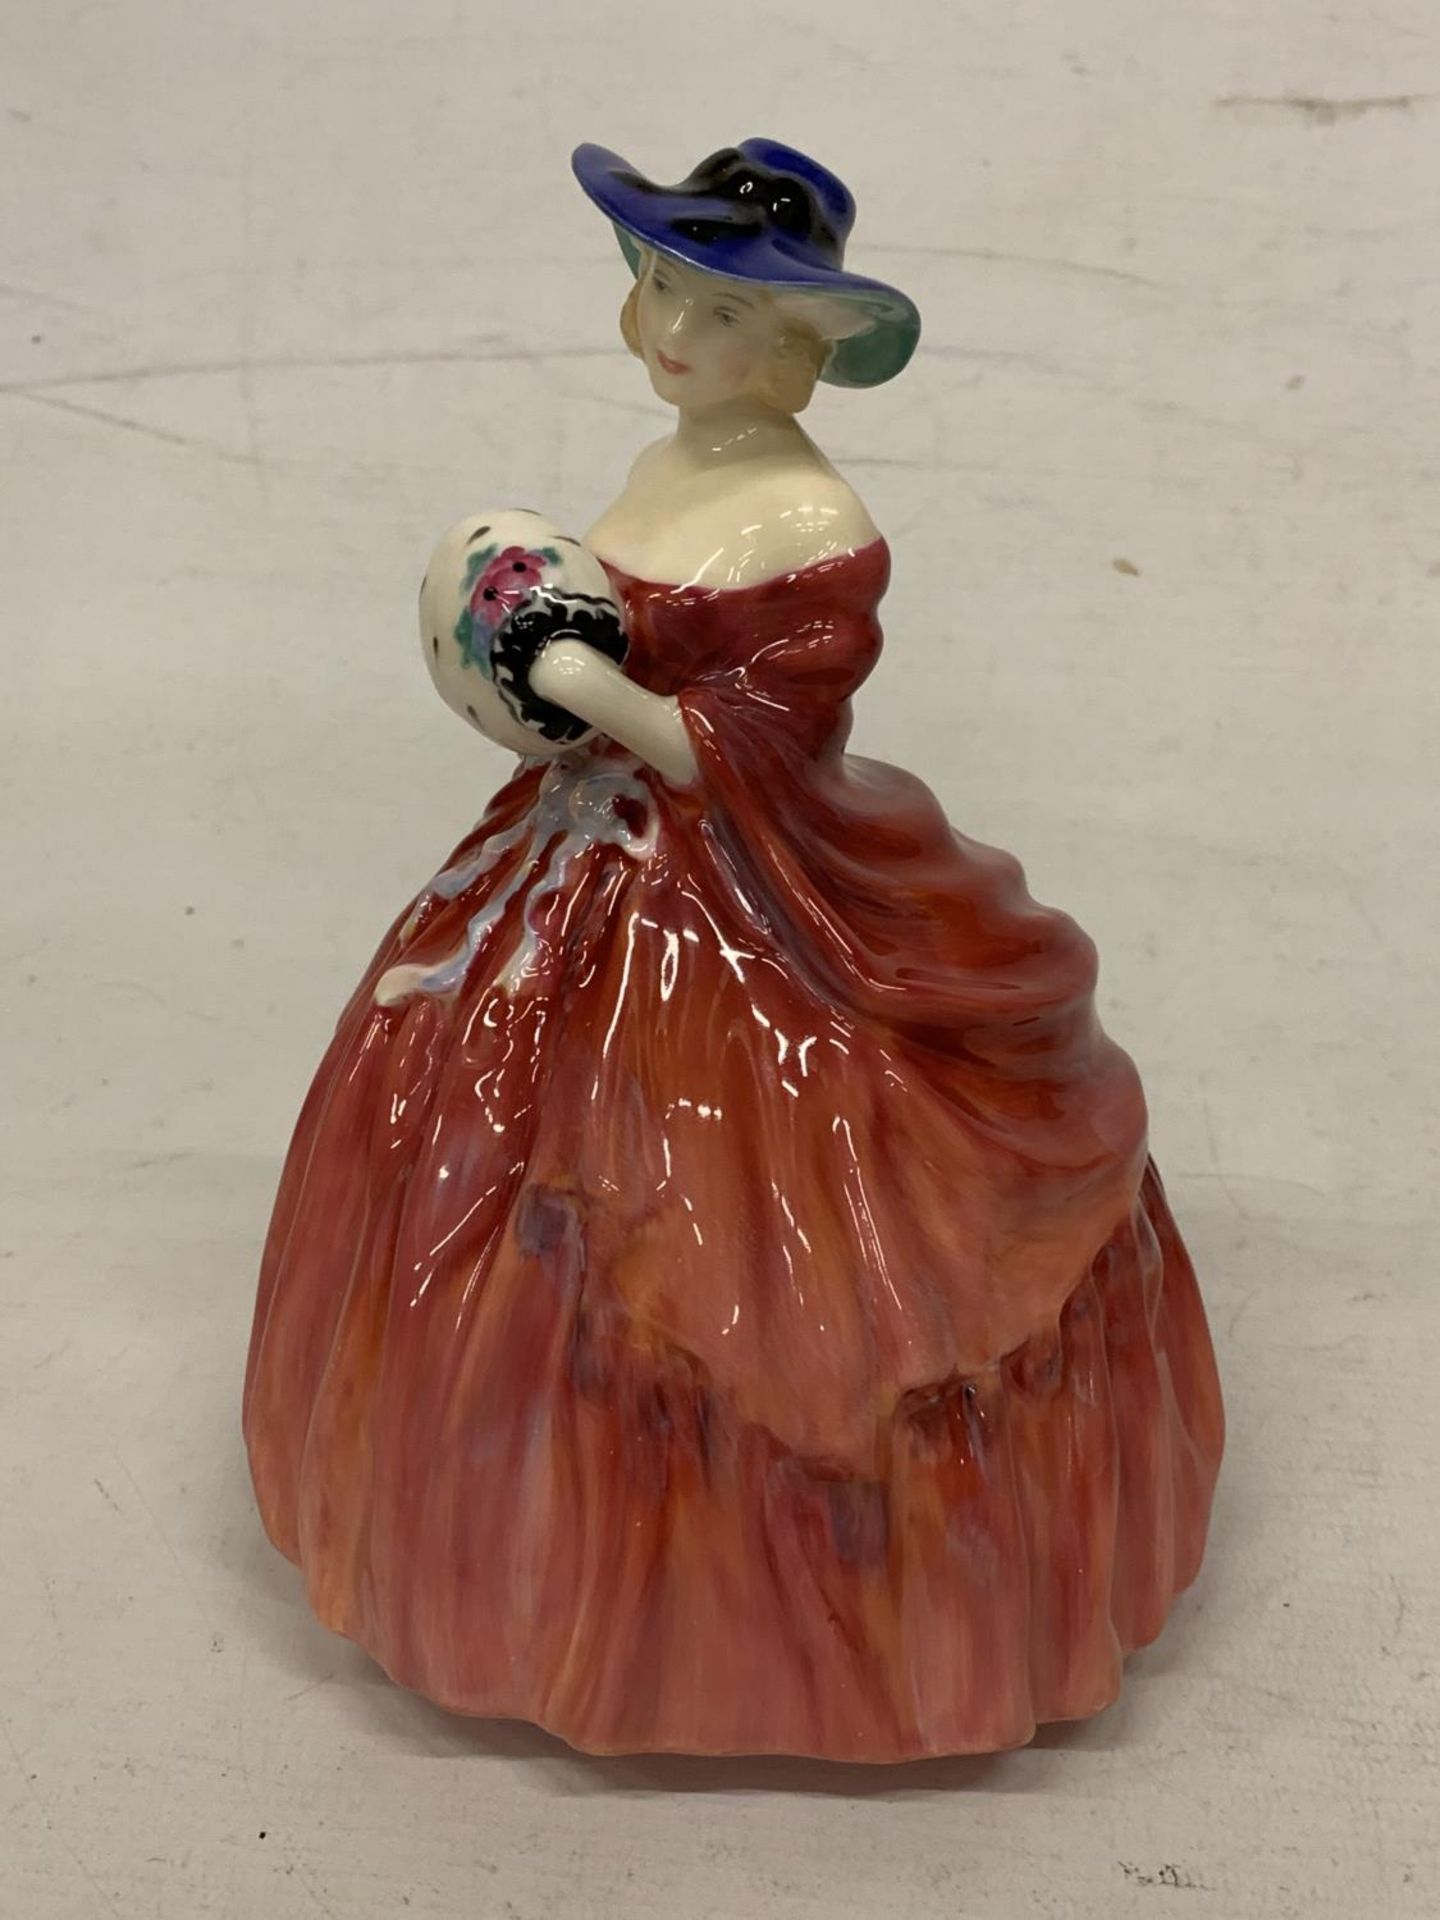 A ROYAL DOULTON FIGURINE "GENEVIEVE" HN 1962 - Image 4 of 5